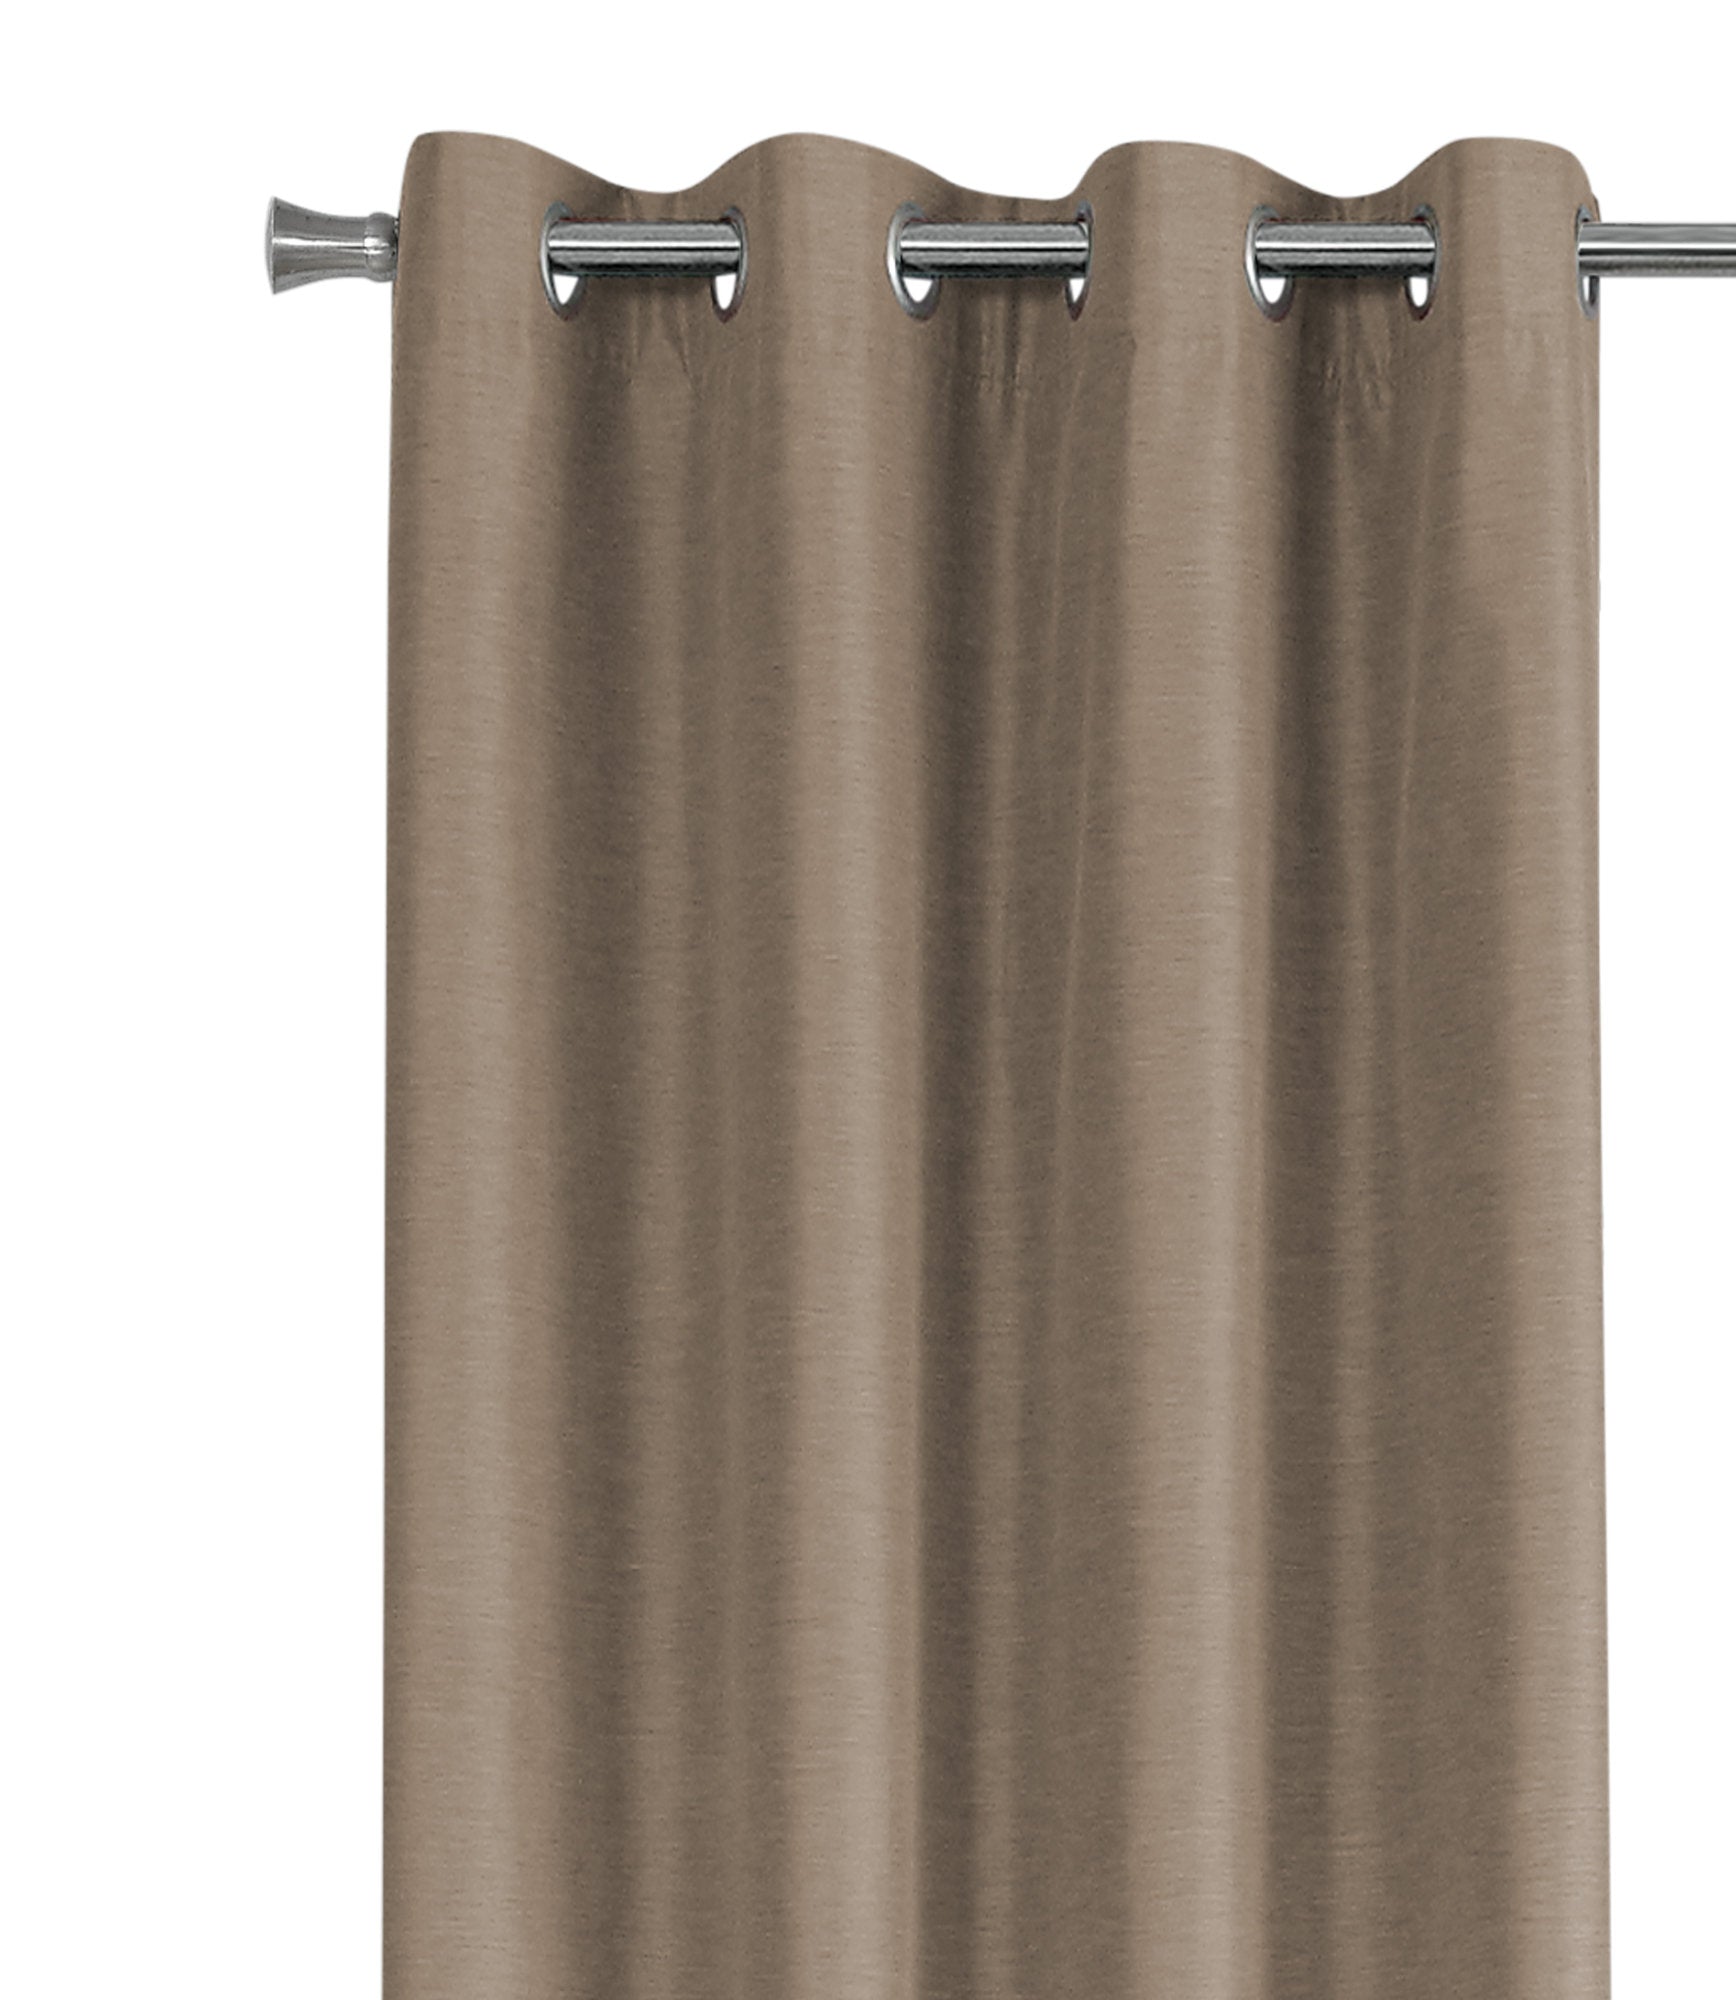 MN-999838    Curtain Panel, 2Pcs Set, 54"W X 84"L, 100% Blackout, Grommet, Living Room, Bedroom, Kitchen, Thermal Insulation Fabric, Polyester Full Light Blocking Fabric, Brown, Contemporary, Modern